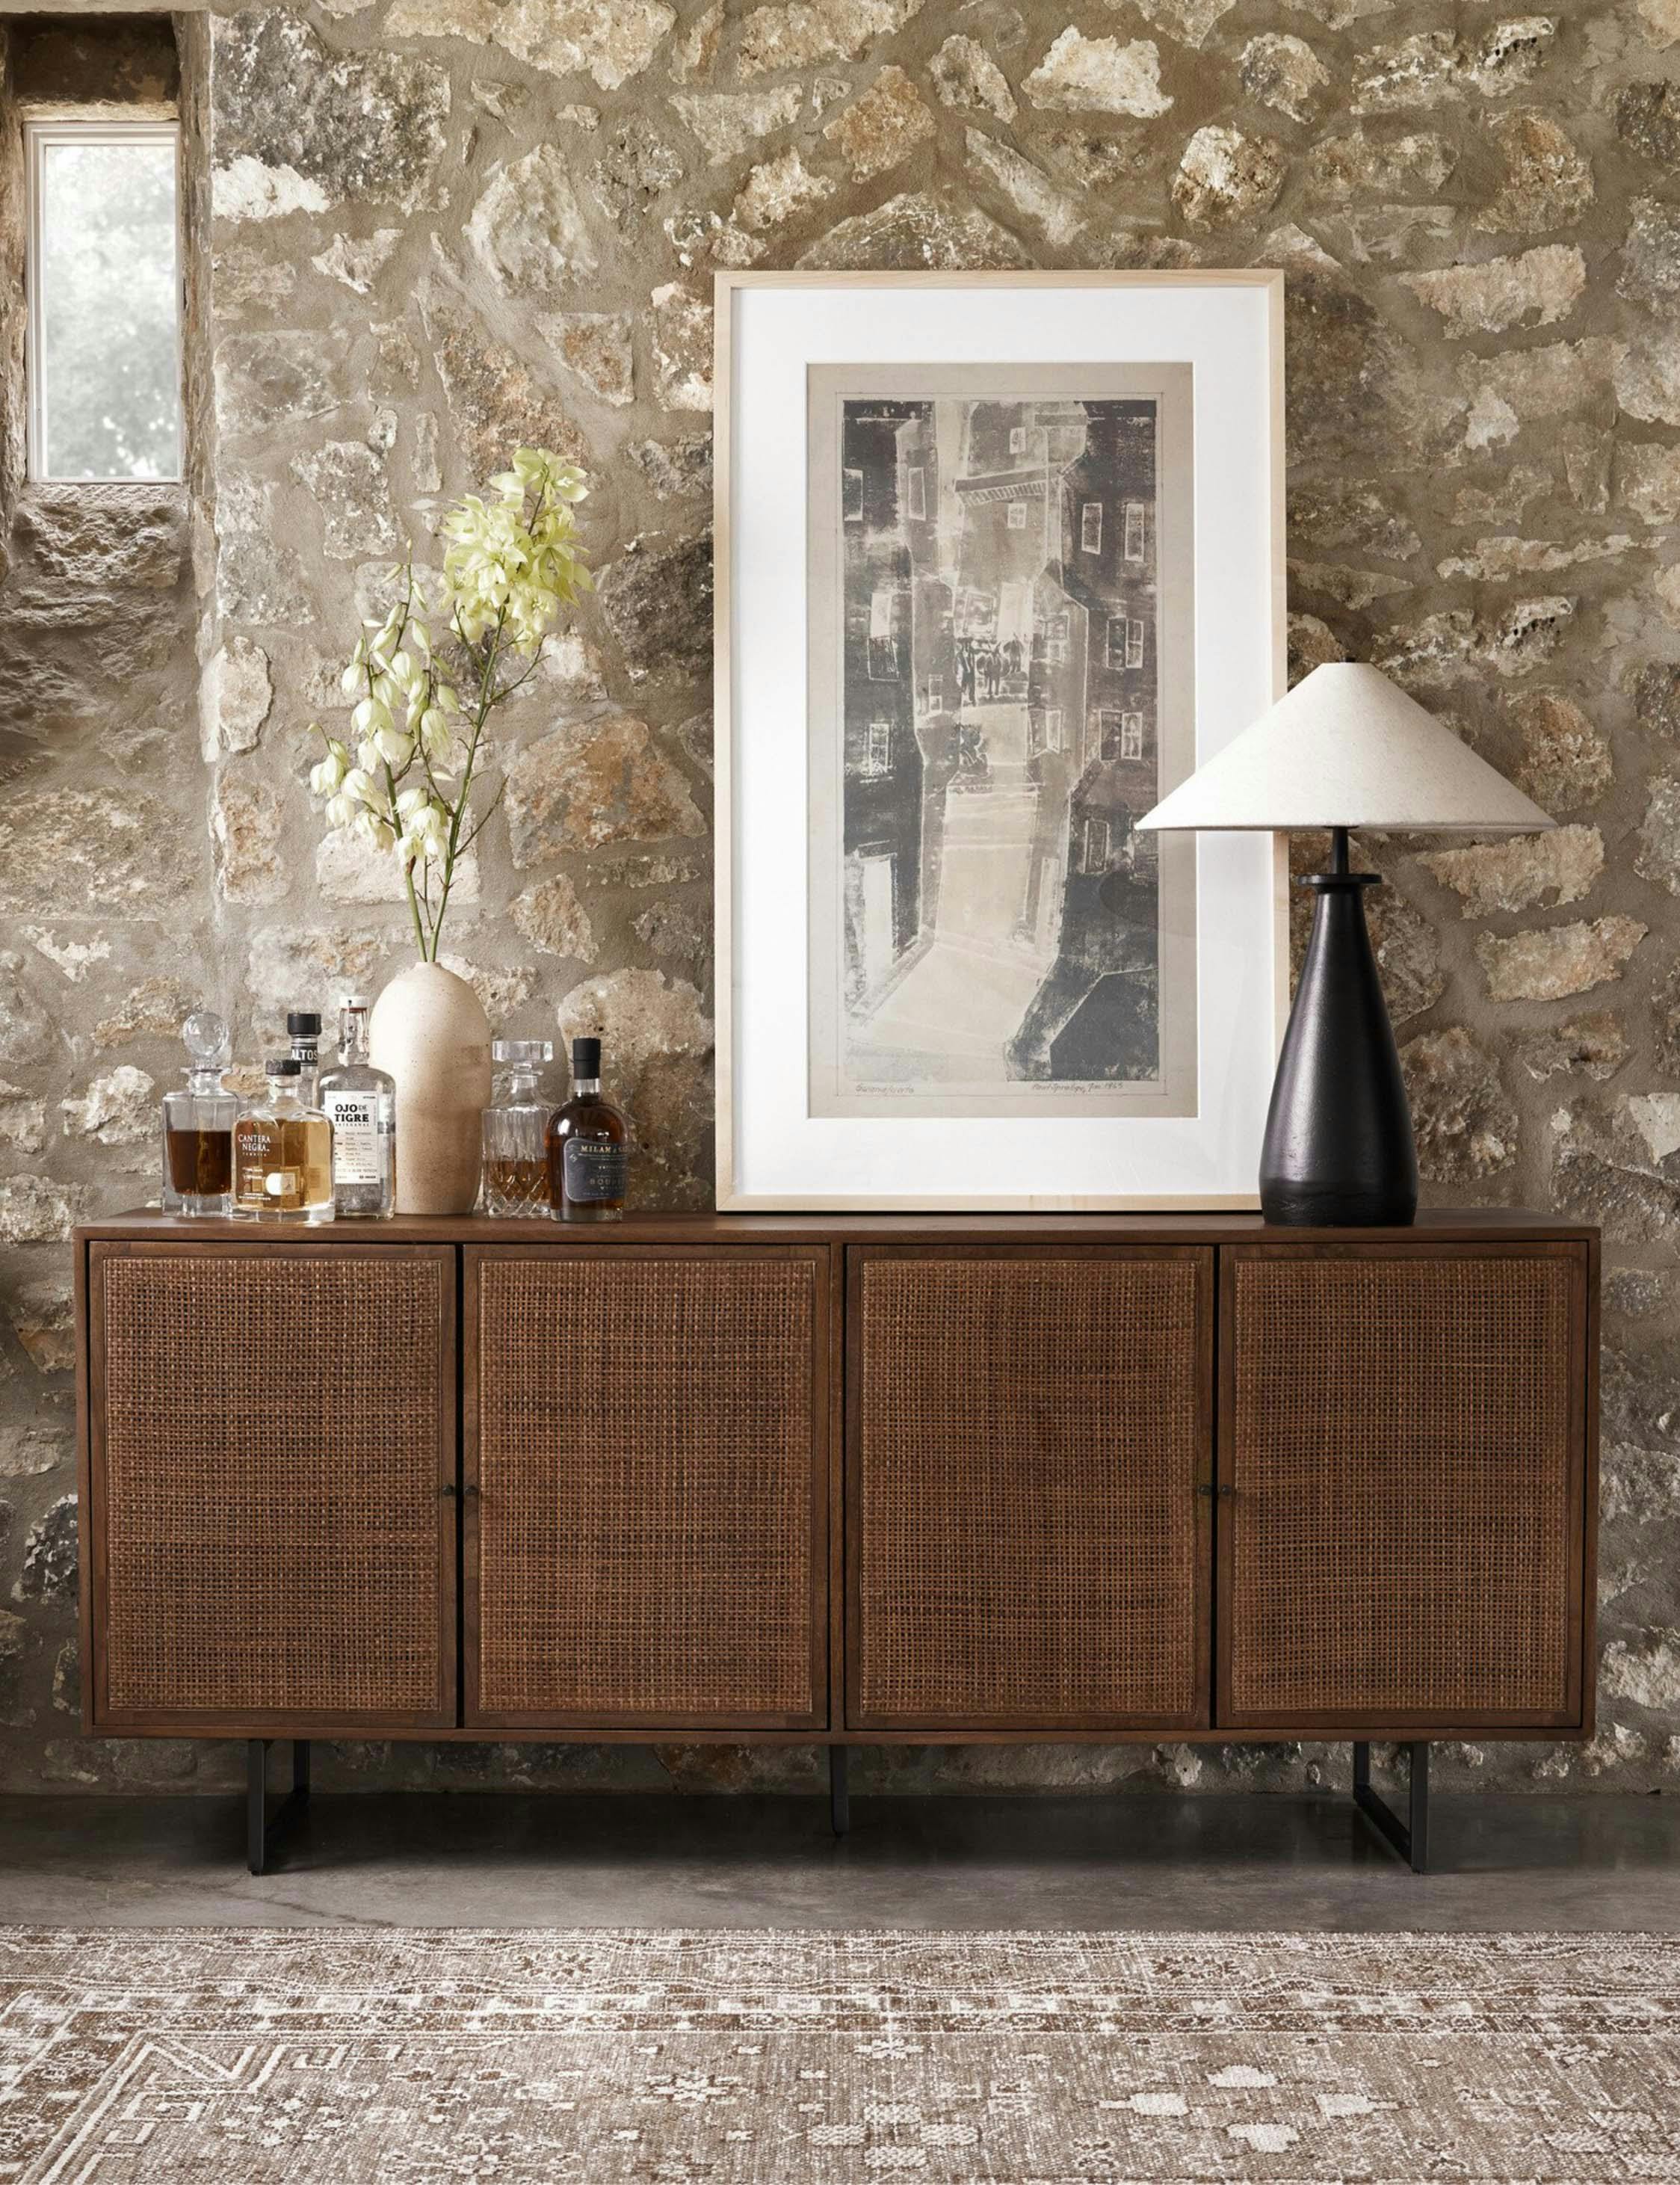 Modern Artisanal Cane and Mango Wood 72" Console Table in Brown